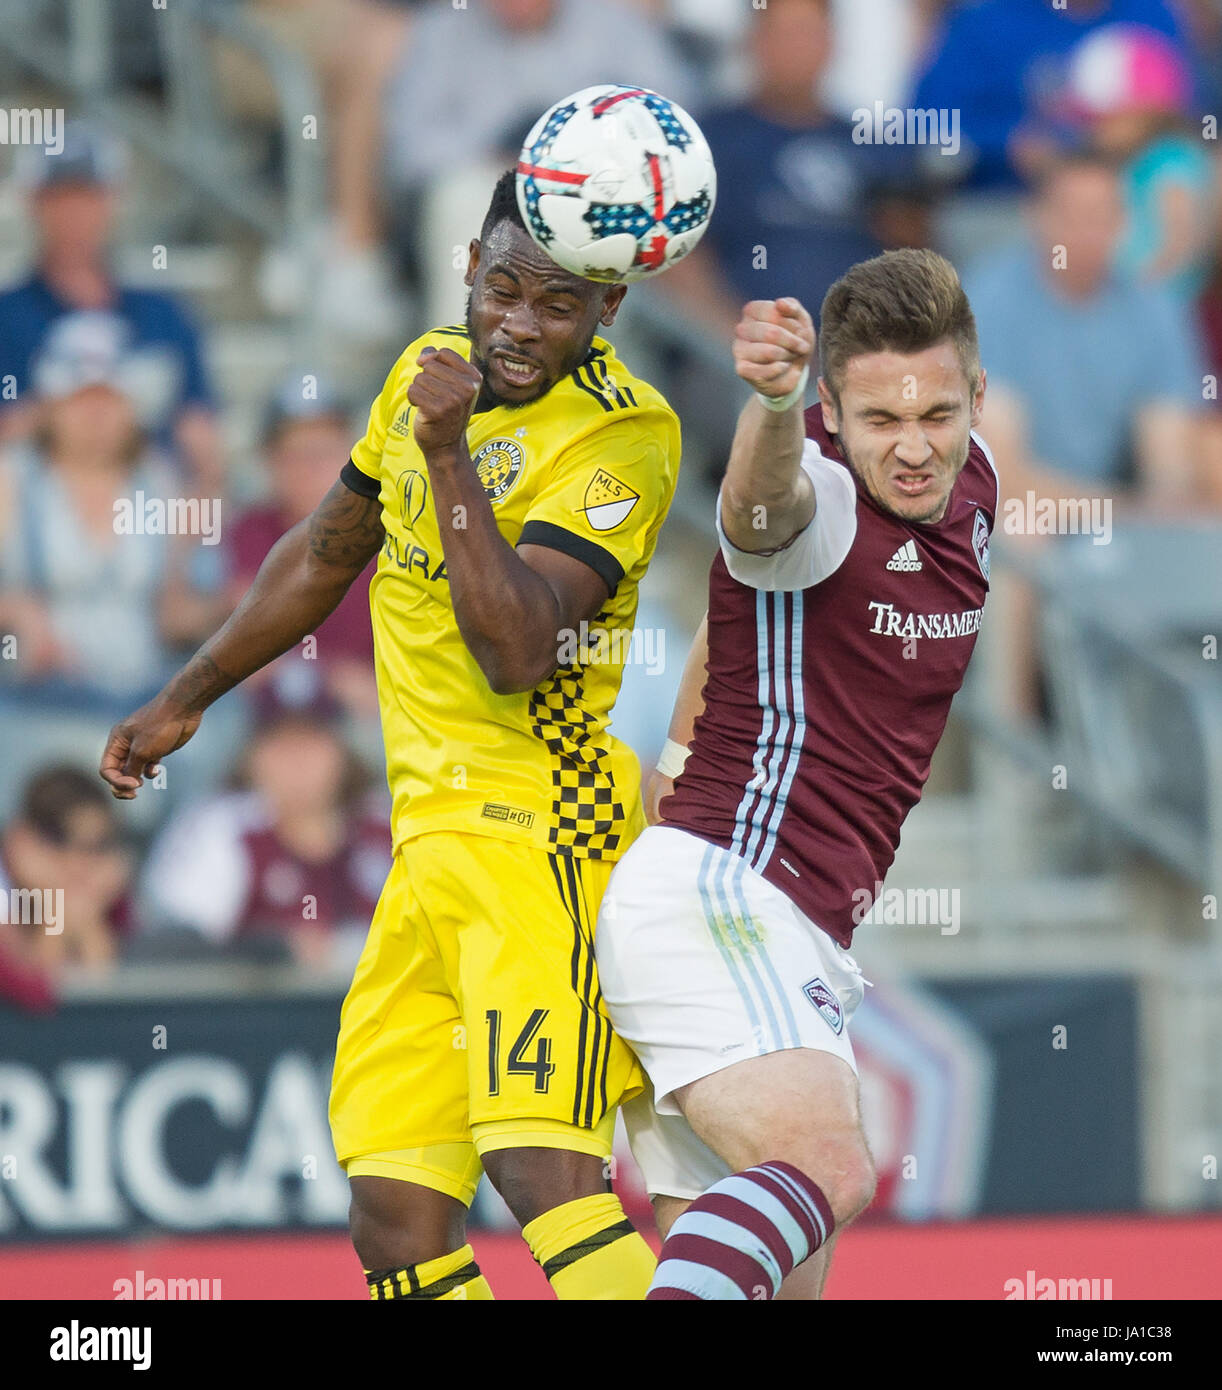 Commerce City, Colorado, USA. 3rd June, 2017. Crew D WAYLON FRANCIS, left, heads the ball away from Rapids F KEVIN DOYLE, right, during the 2nd. Half at Dicks Sporting Goods Park Saturday night. The Rapids beat the Crew 2-1. Credit: Hector Acevedo/ZUMA Wire/Alamy Live News Stock Photo